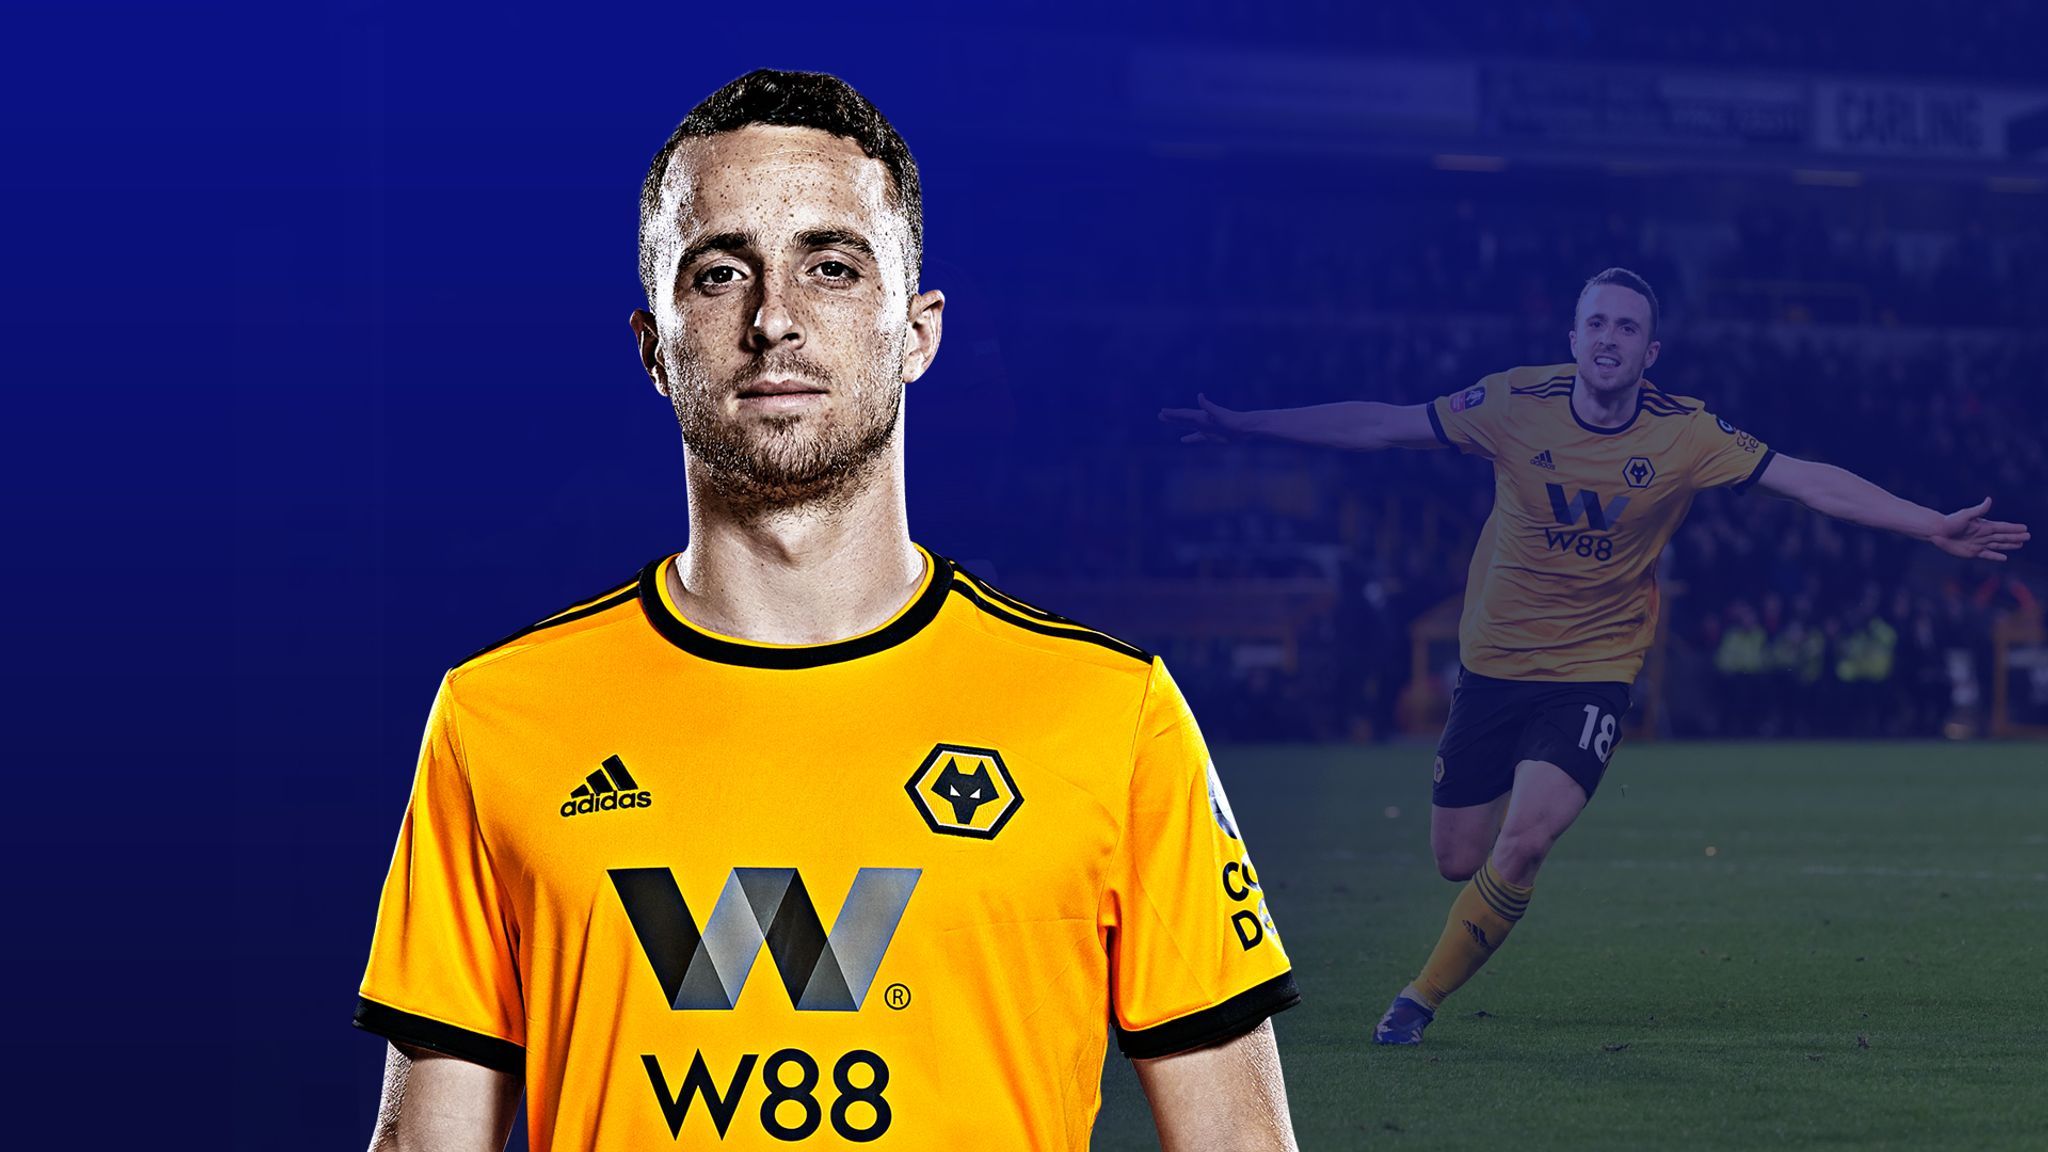 Diogo Jota has become Wolves' most important player in 2019